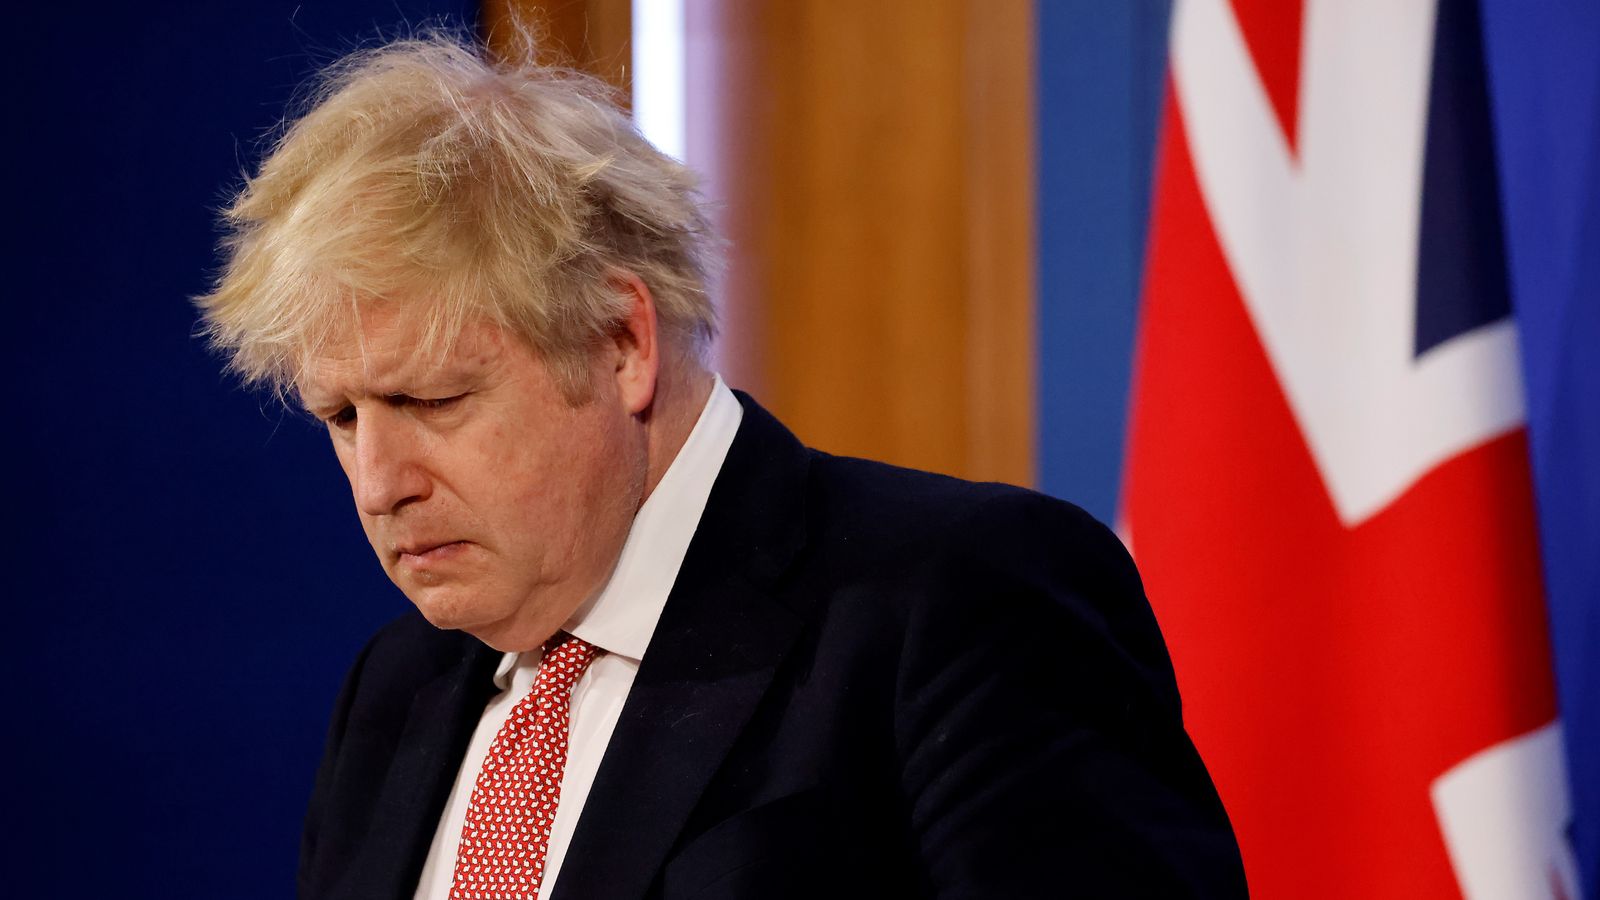 Boris Johnson to admit he 'unquestionably made mistakes' at COVID inquiry - report